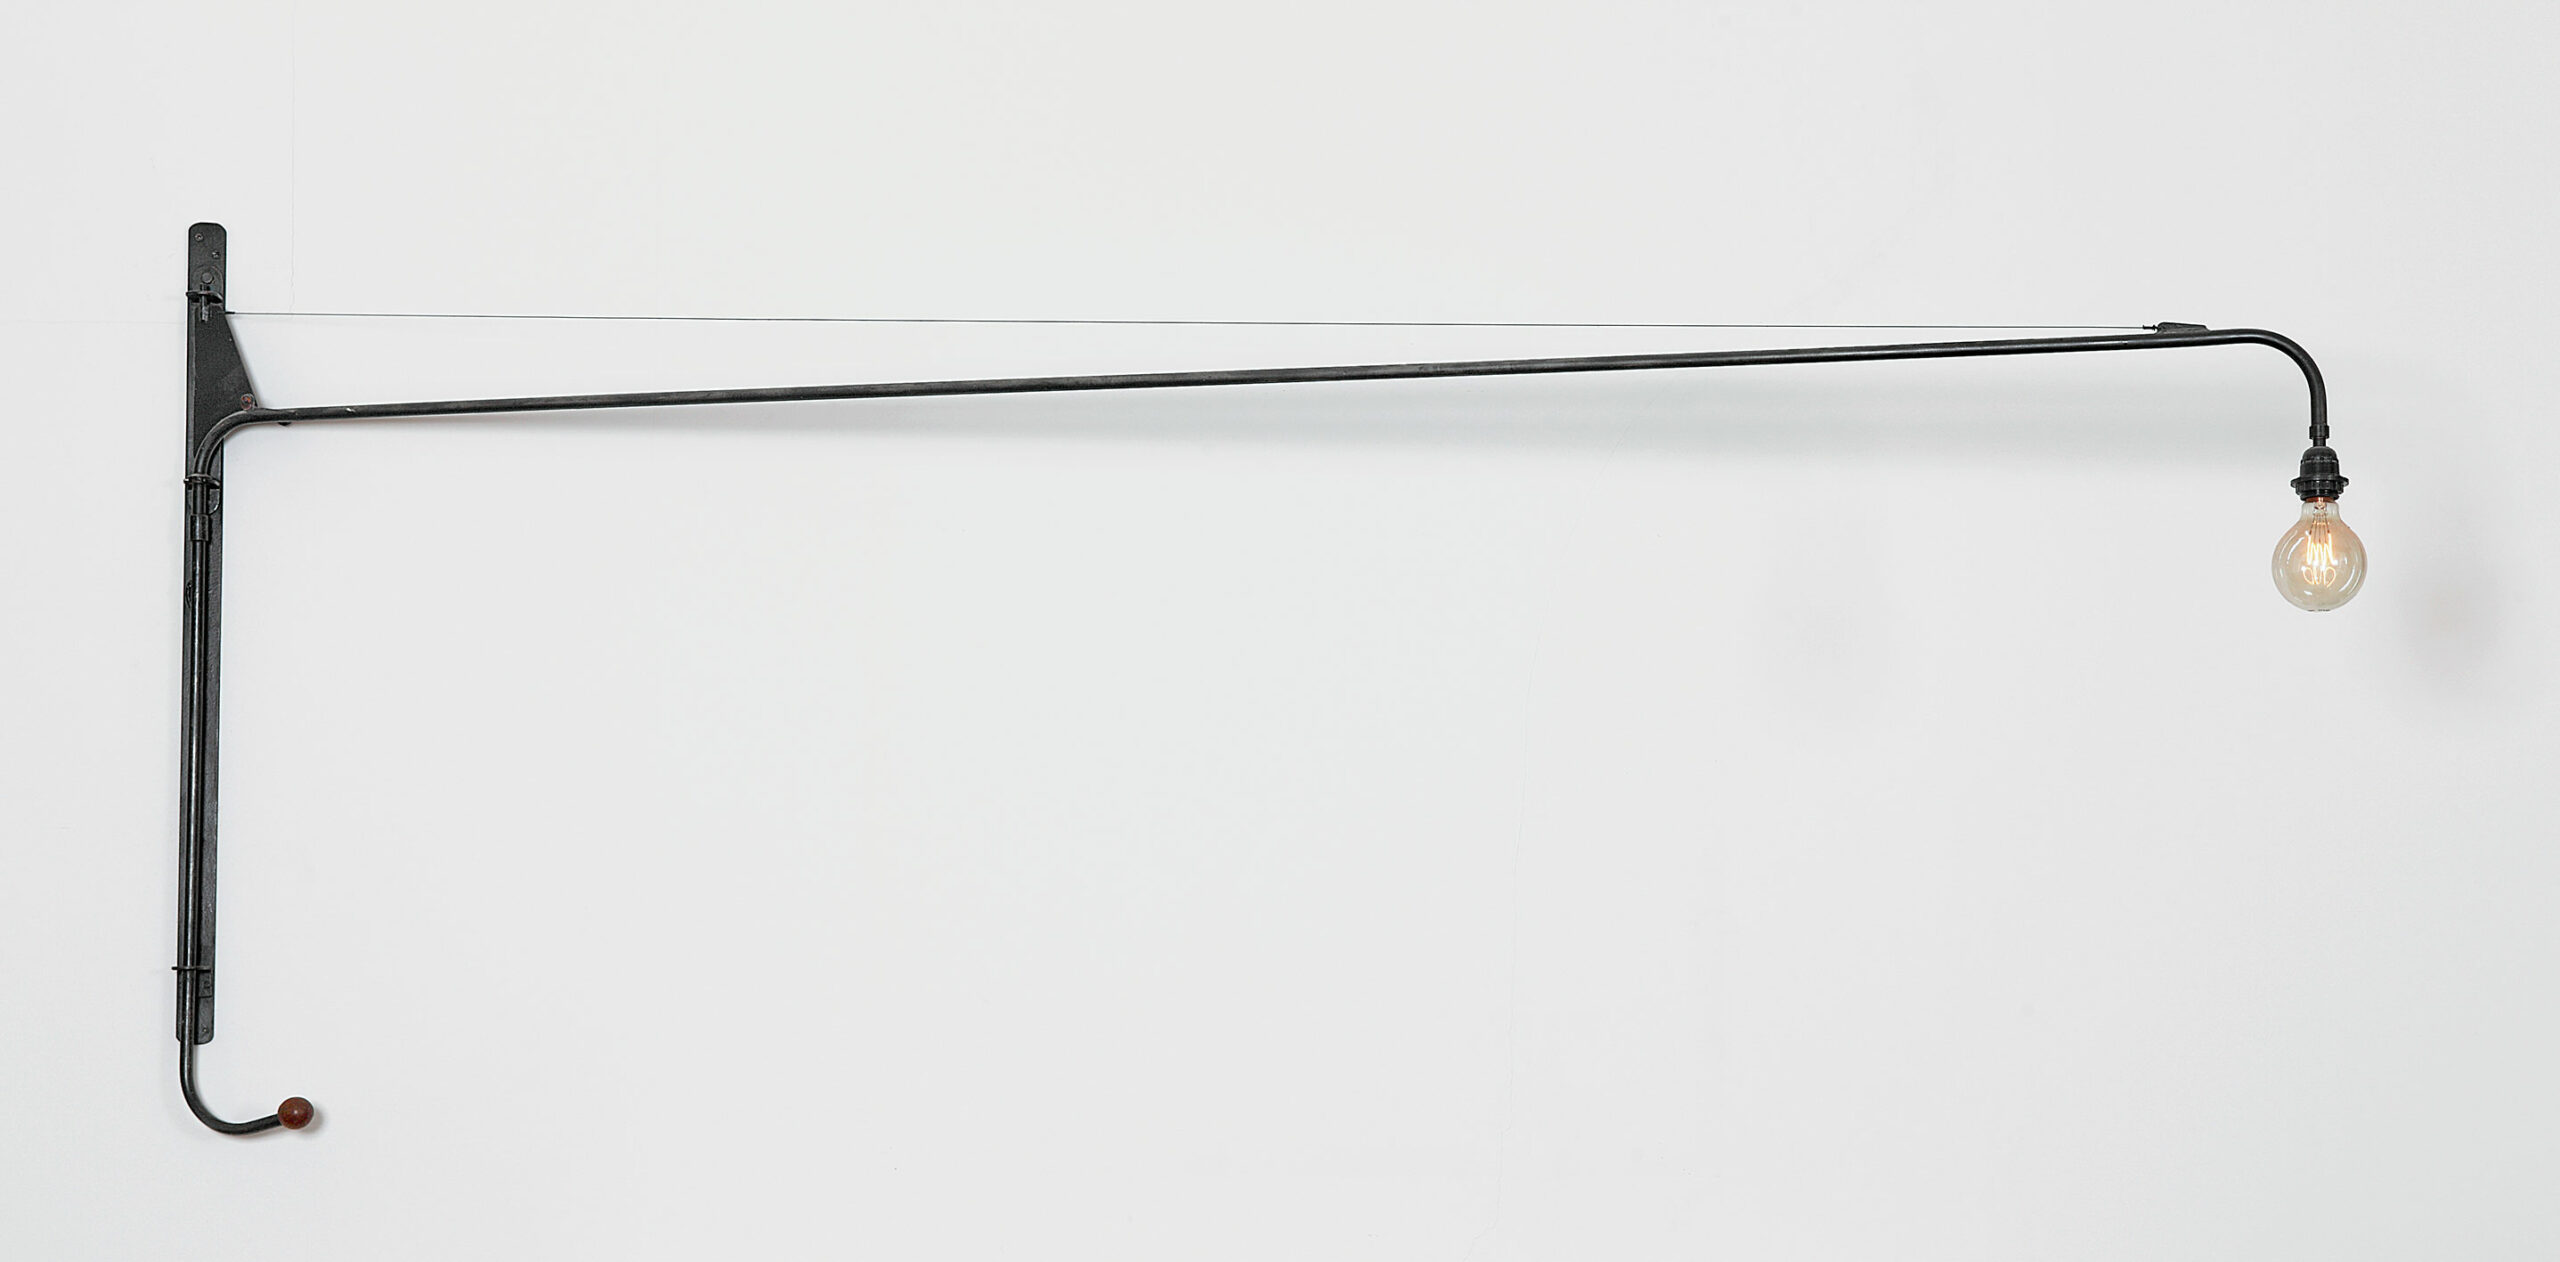 Swing-jib lamp no. 602, with adjustment handle, for the Air France building, Brazzaville, 1952.